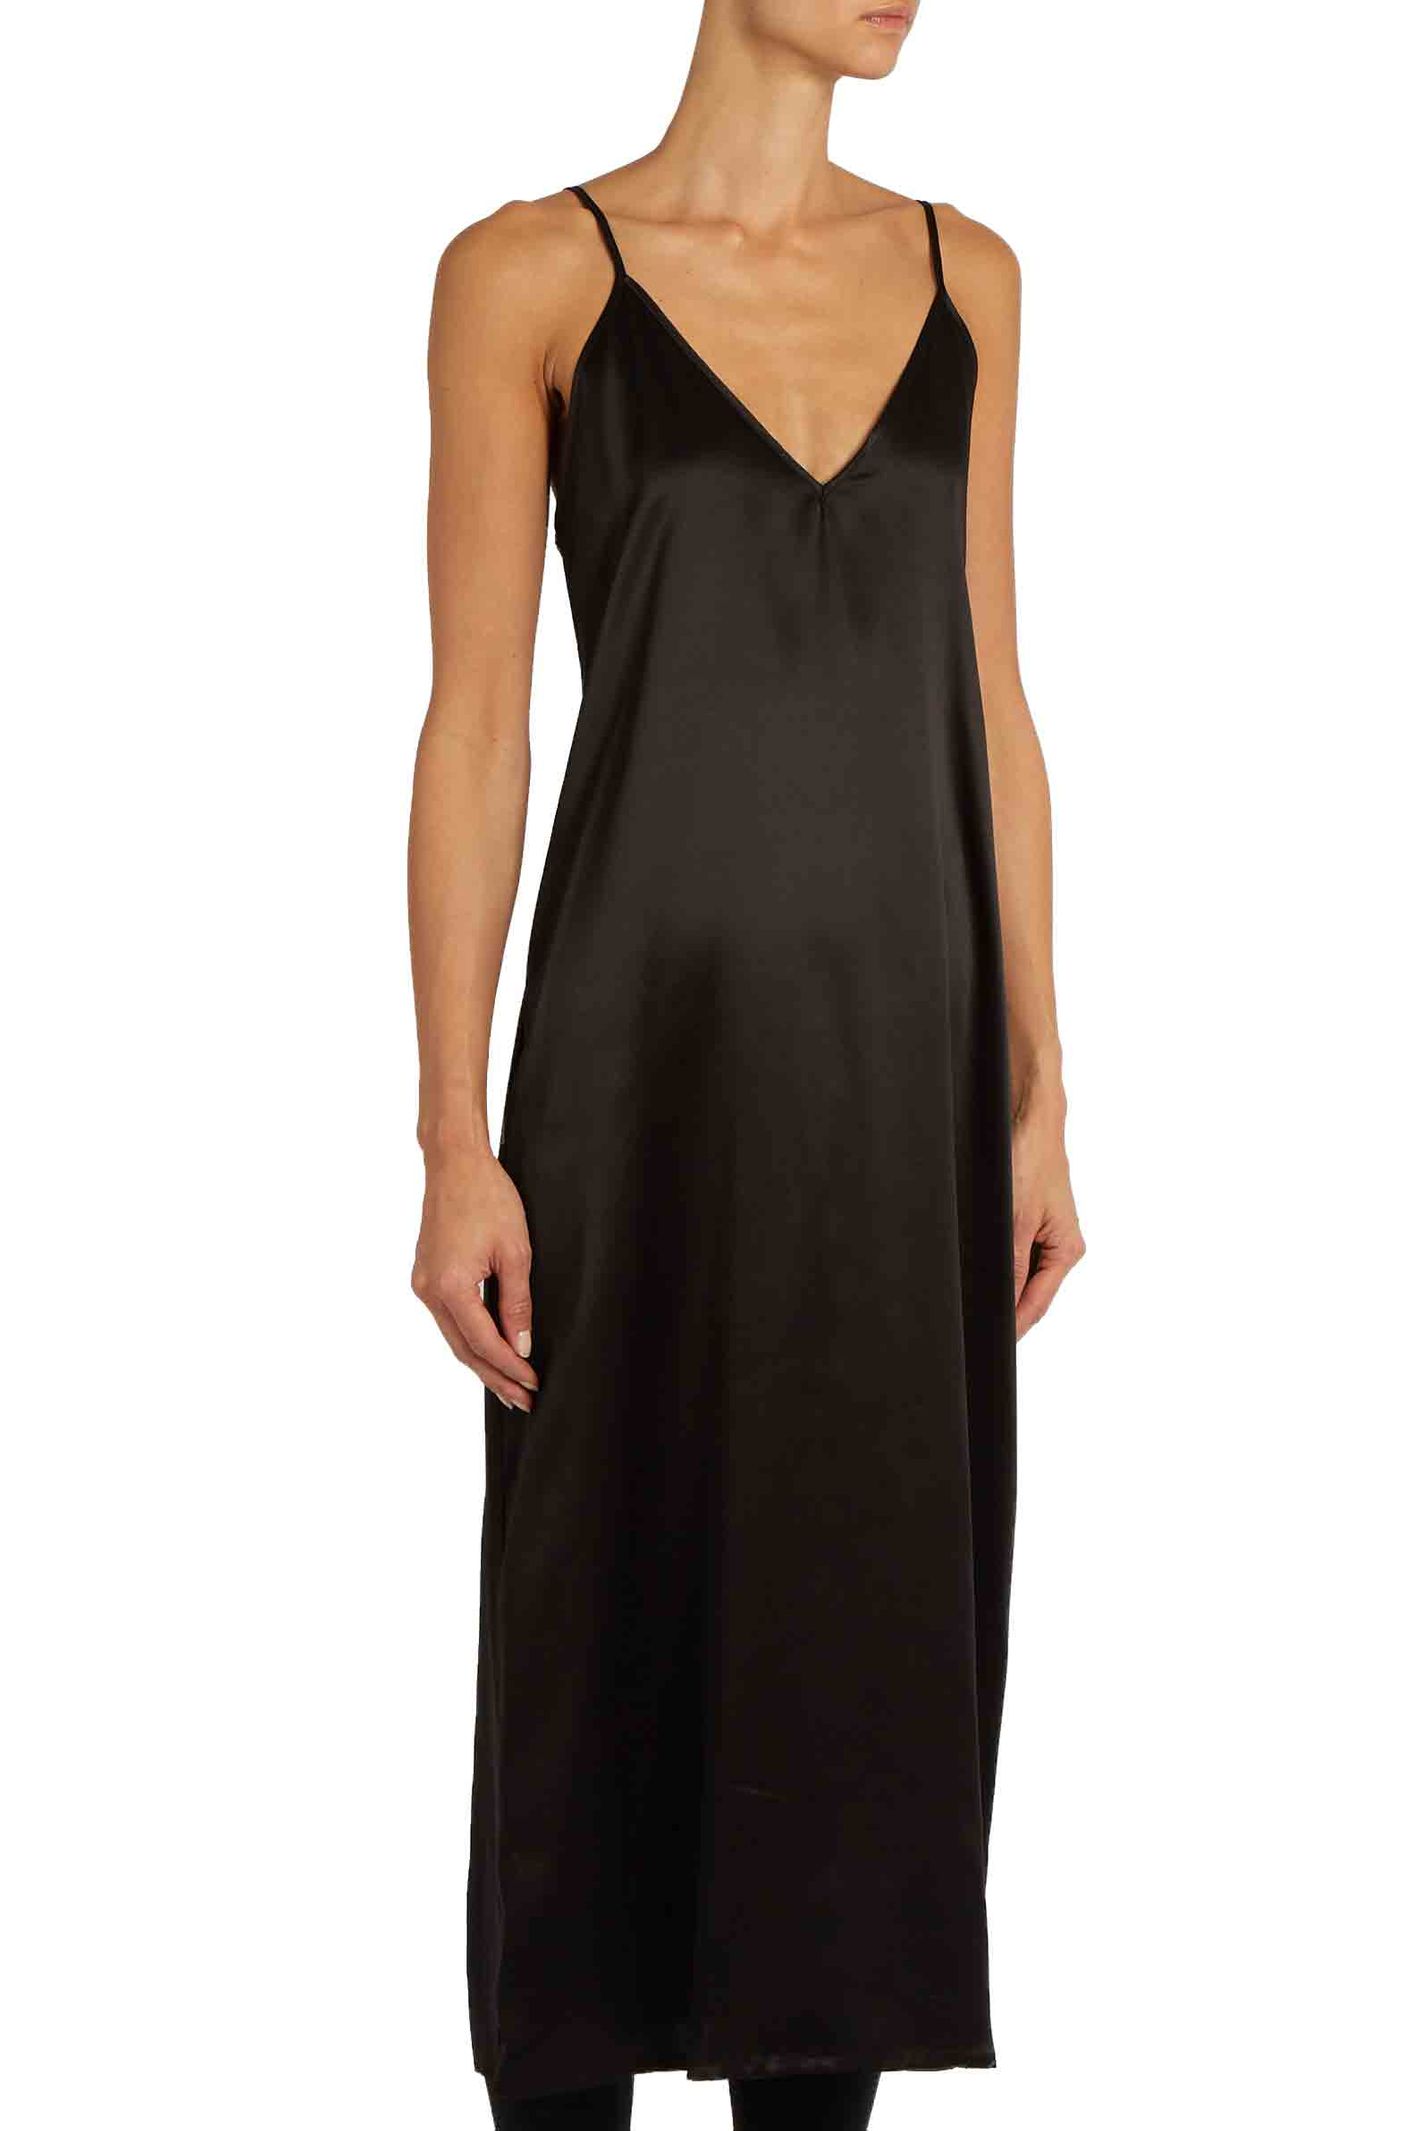 The Black Slip Dress You Can Wear to Any Wedding